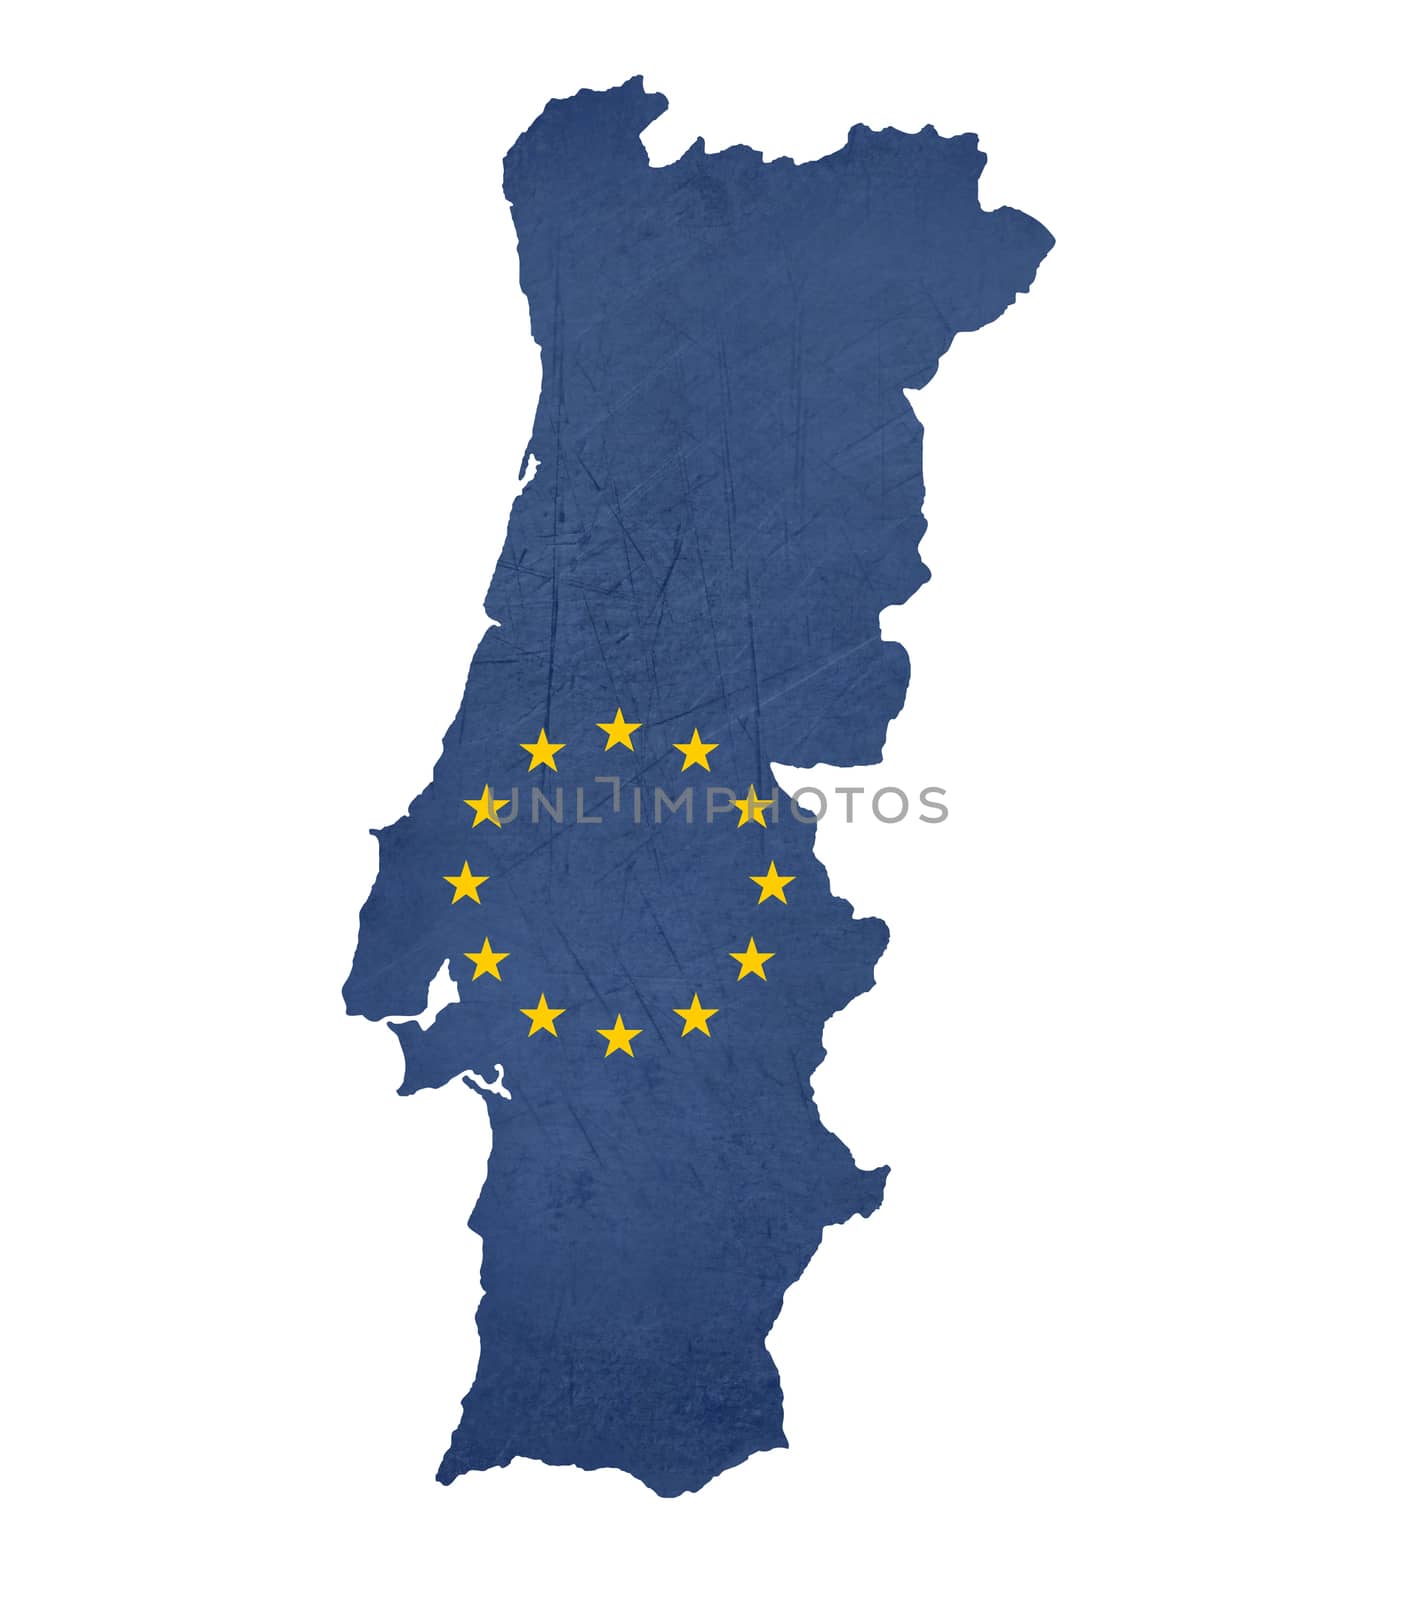 European flag map of Portugal isolated on white background.